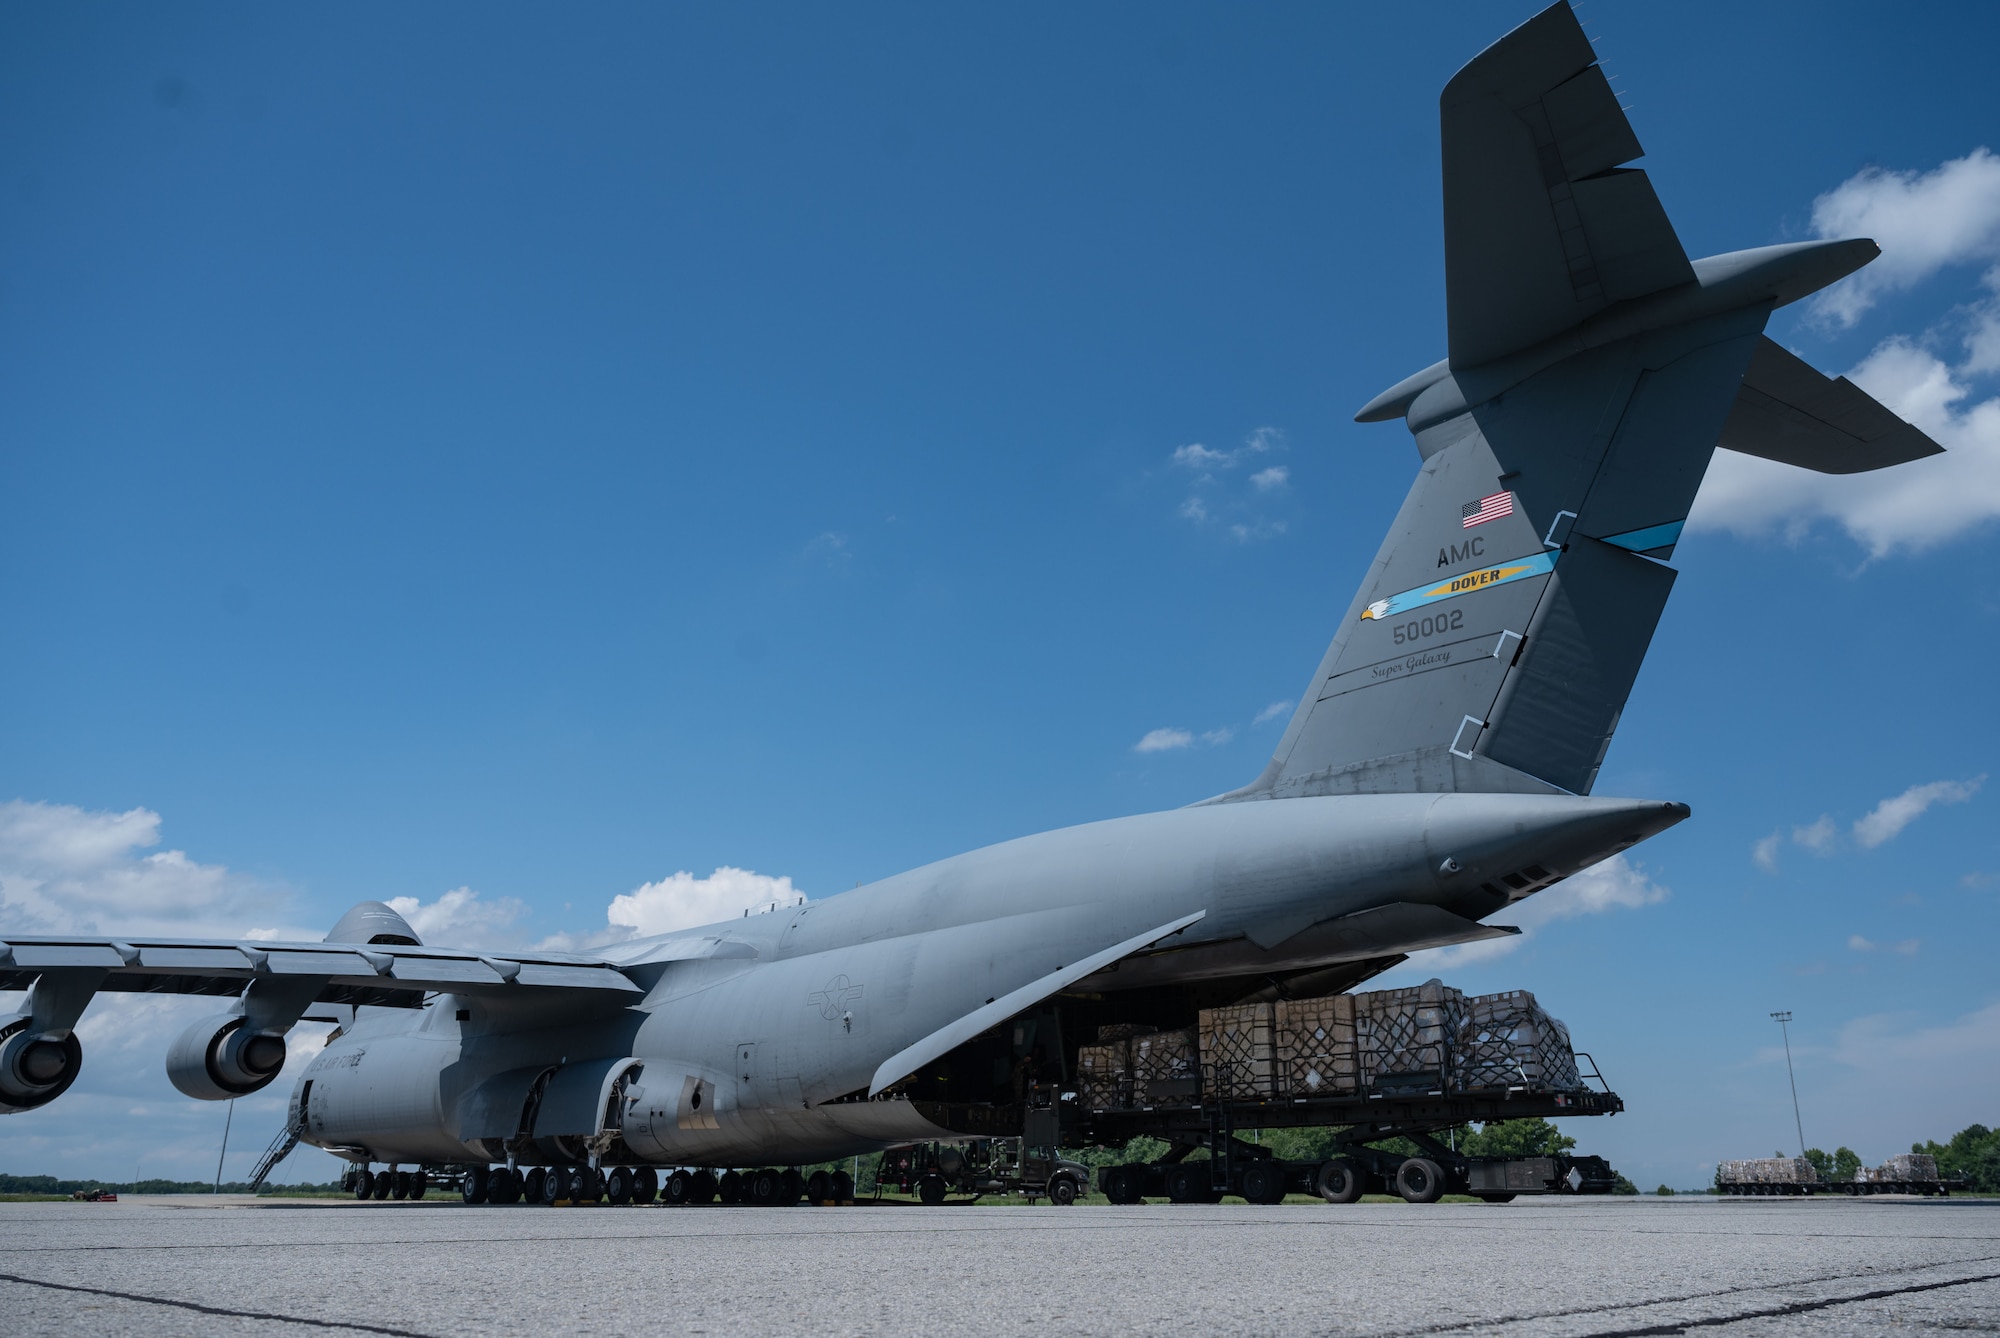 Cargo, bound for Romania, is loaded onto a C-5M Super Galaxy during a foreign military sales mission at Dover Air Force Base, Delaware, June 27, 2023. The partnership between the United States and Romania is rooted in a shared commitment to democratic values, including the rule of law, open markets, respect for and the promotion of human rights. (U.S. Air Force photo by Senior Airman Cydney Lee)